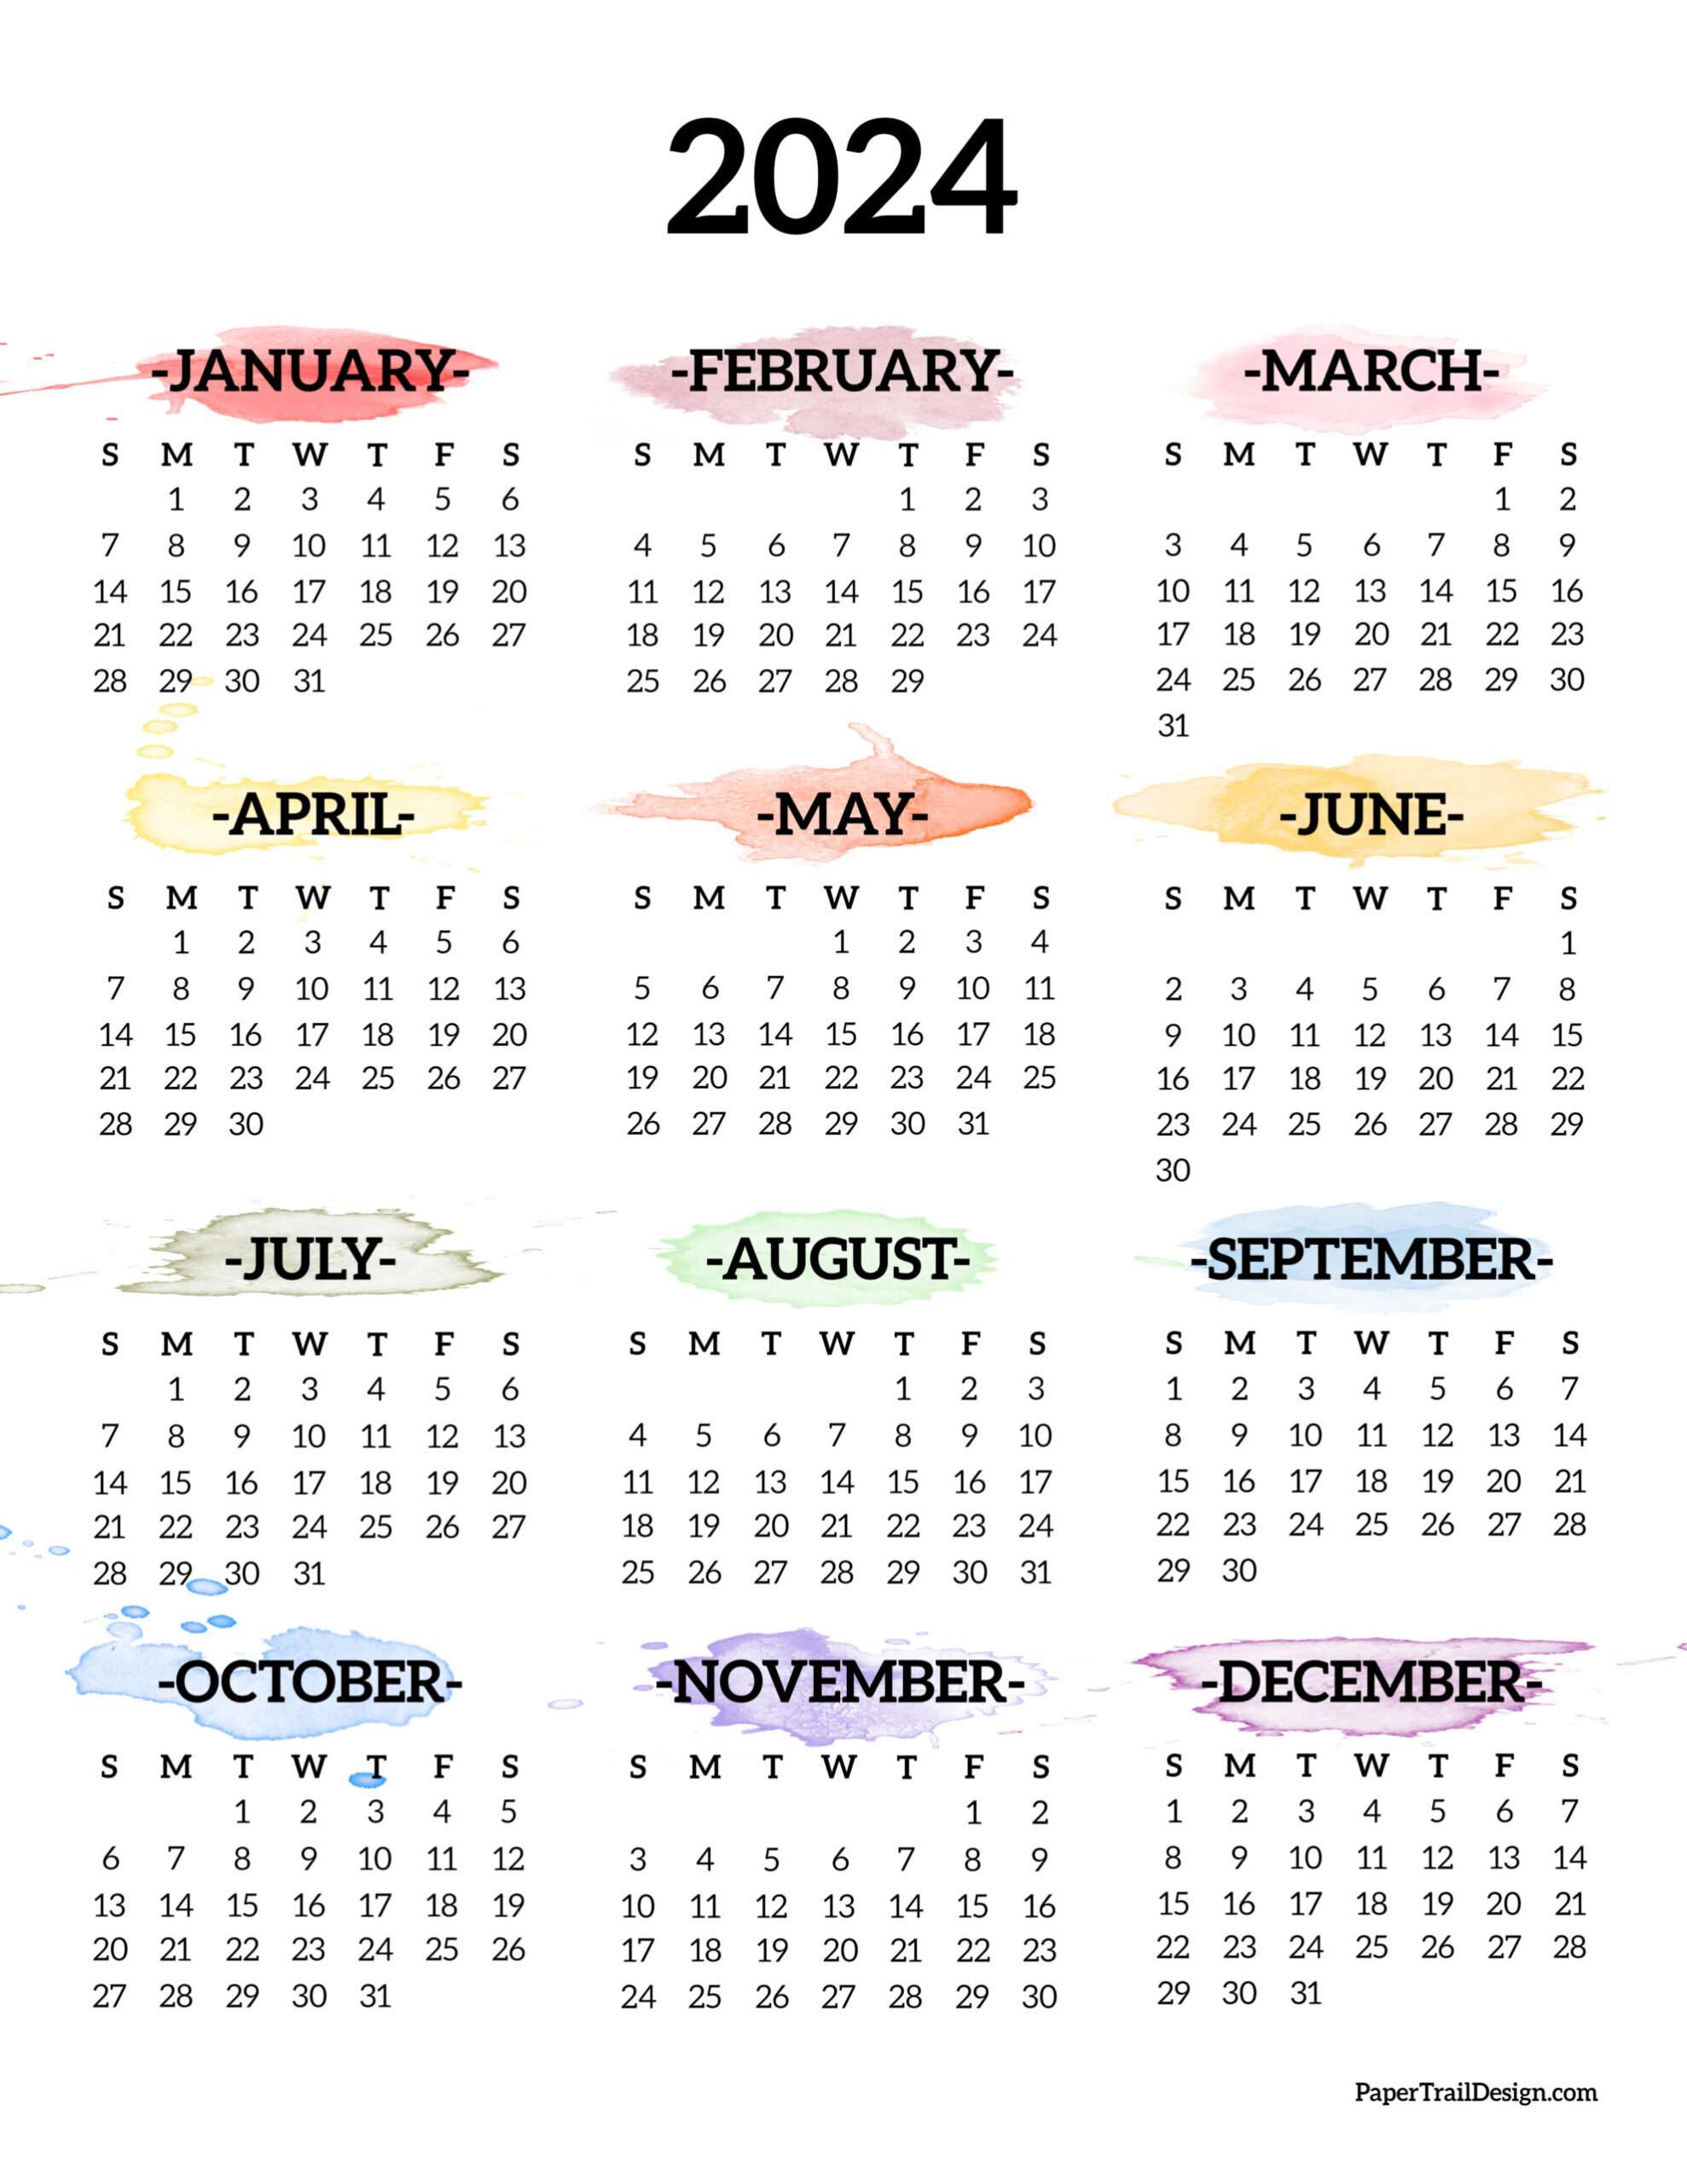 Calendar 2024 Printable One Page - Paper Trail Design for 2024 Calendar At A Glance Printable